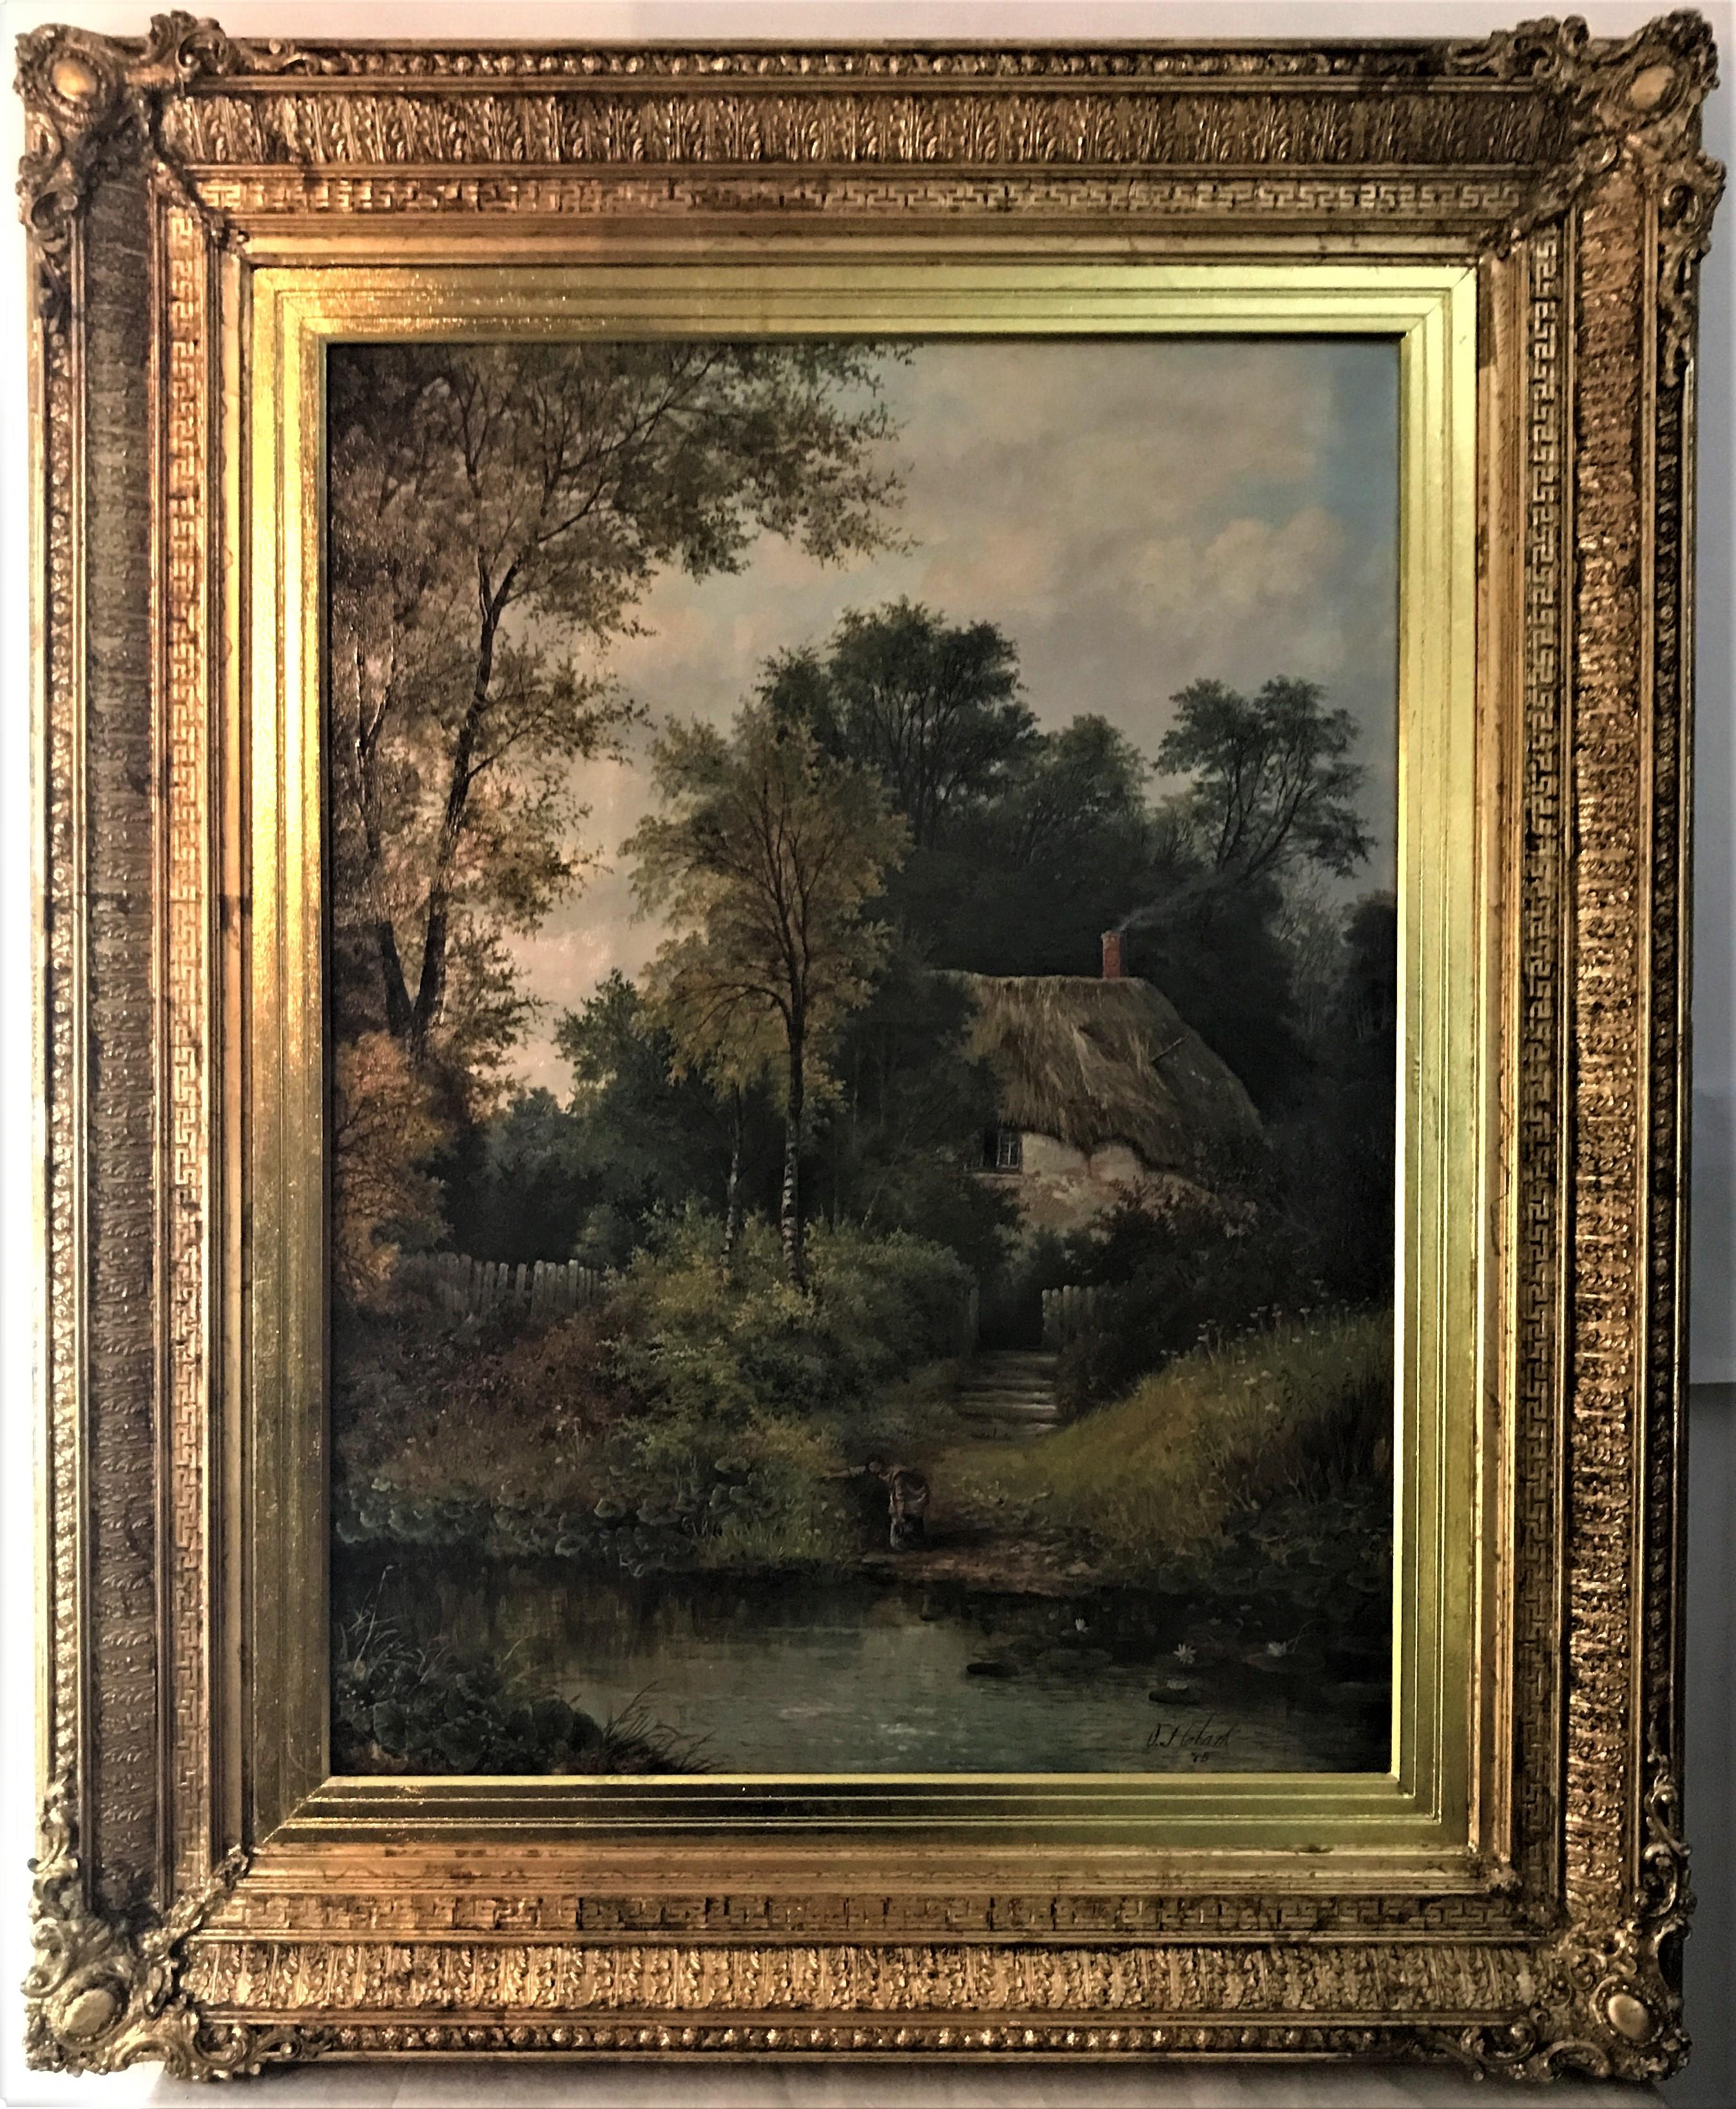 O J Clark Figurative Painting - A Rural Cottage by a Stream, 19thC signed English artist, original oil on canvas